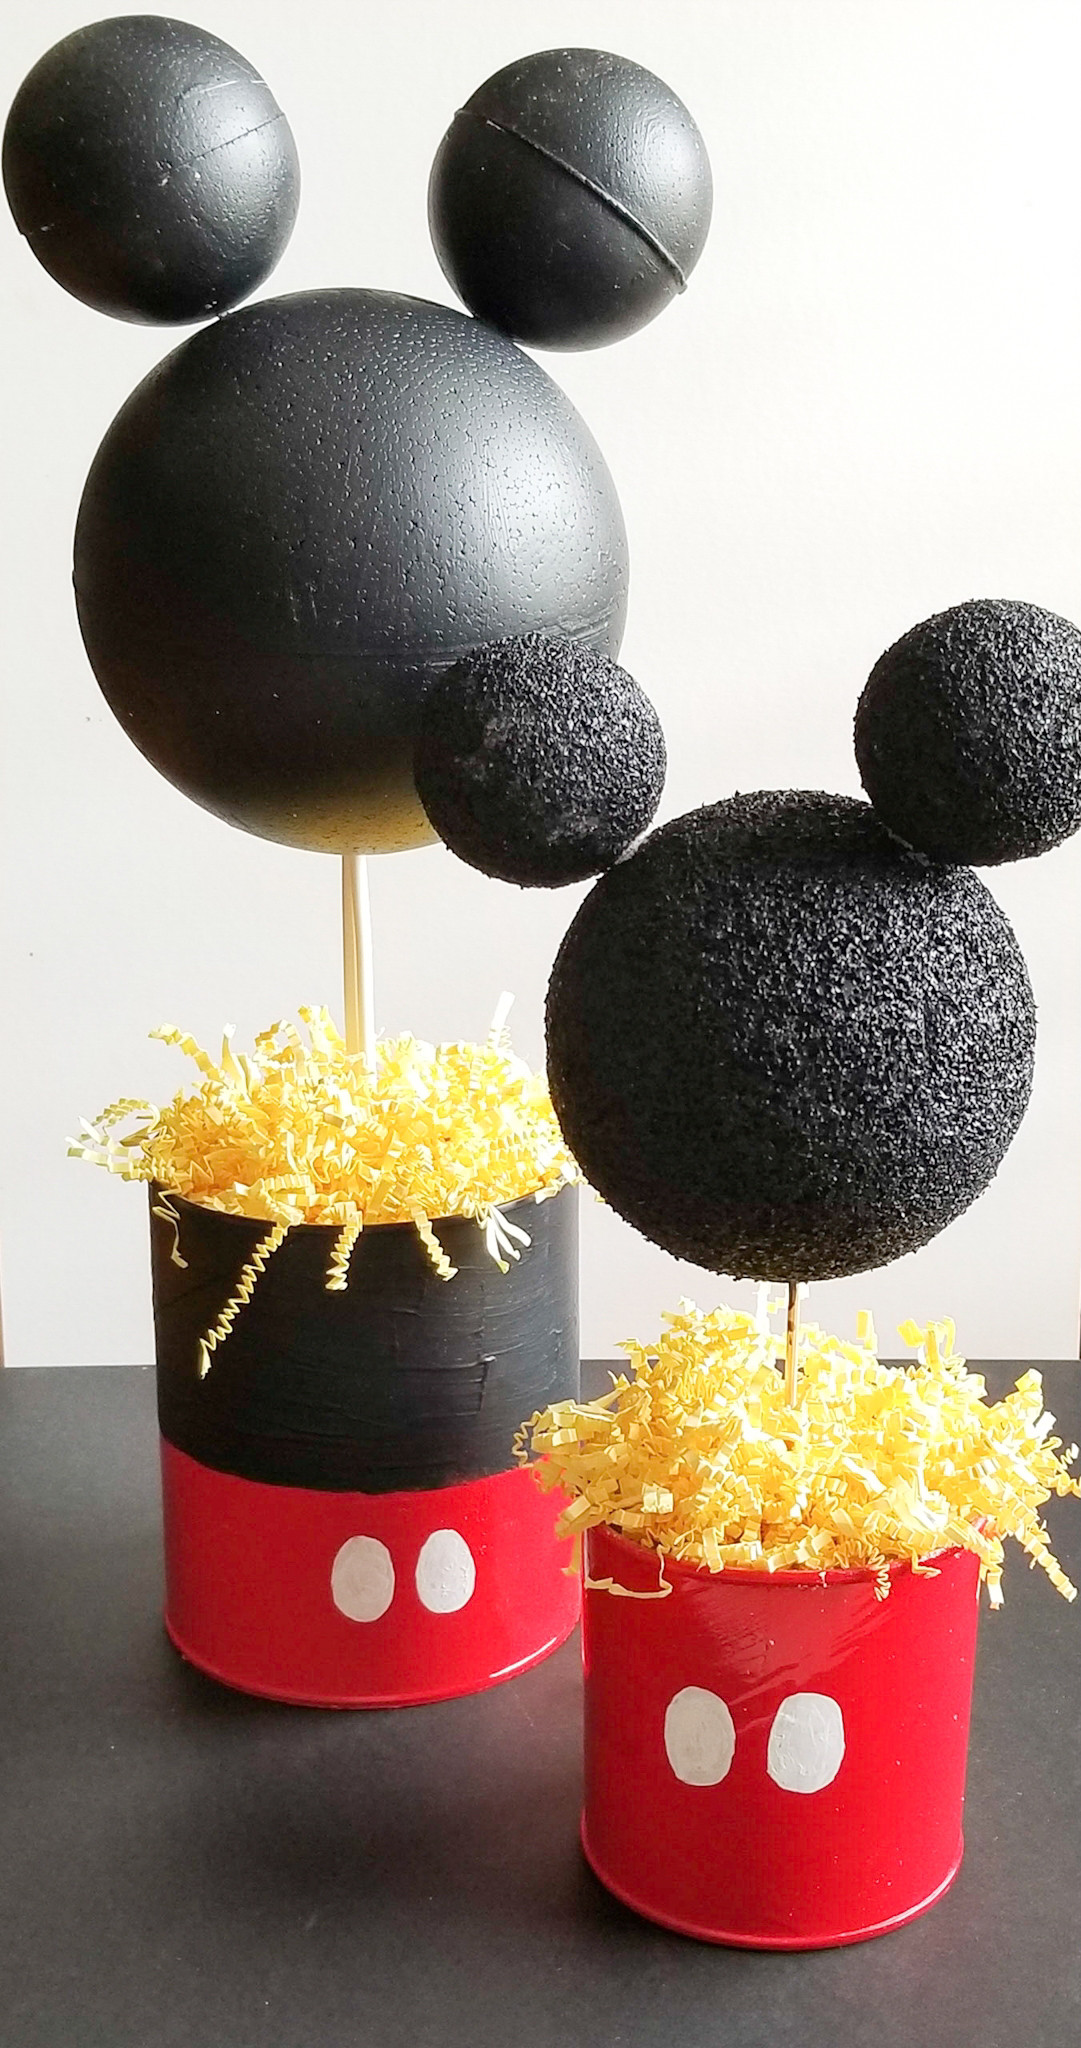 Mickey Mouse Birthday Party Ideas
 DIY Mickey Mouse Party Ideas Beautiful Eats & Things